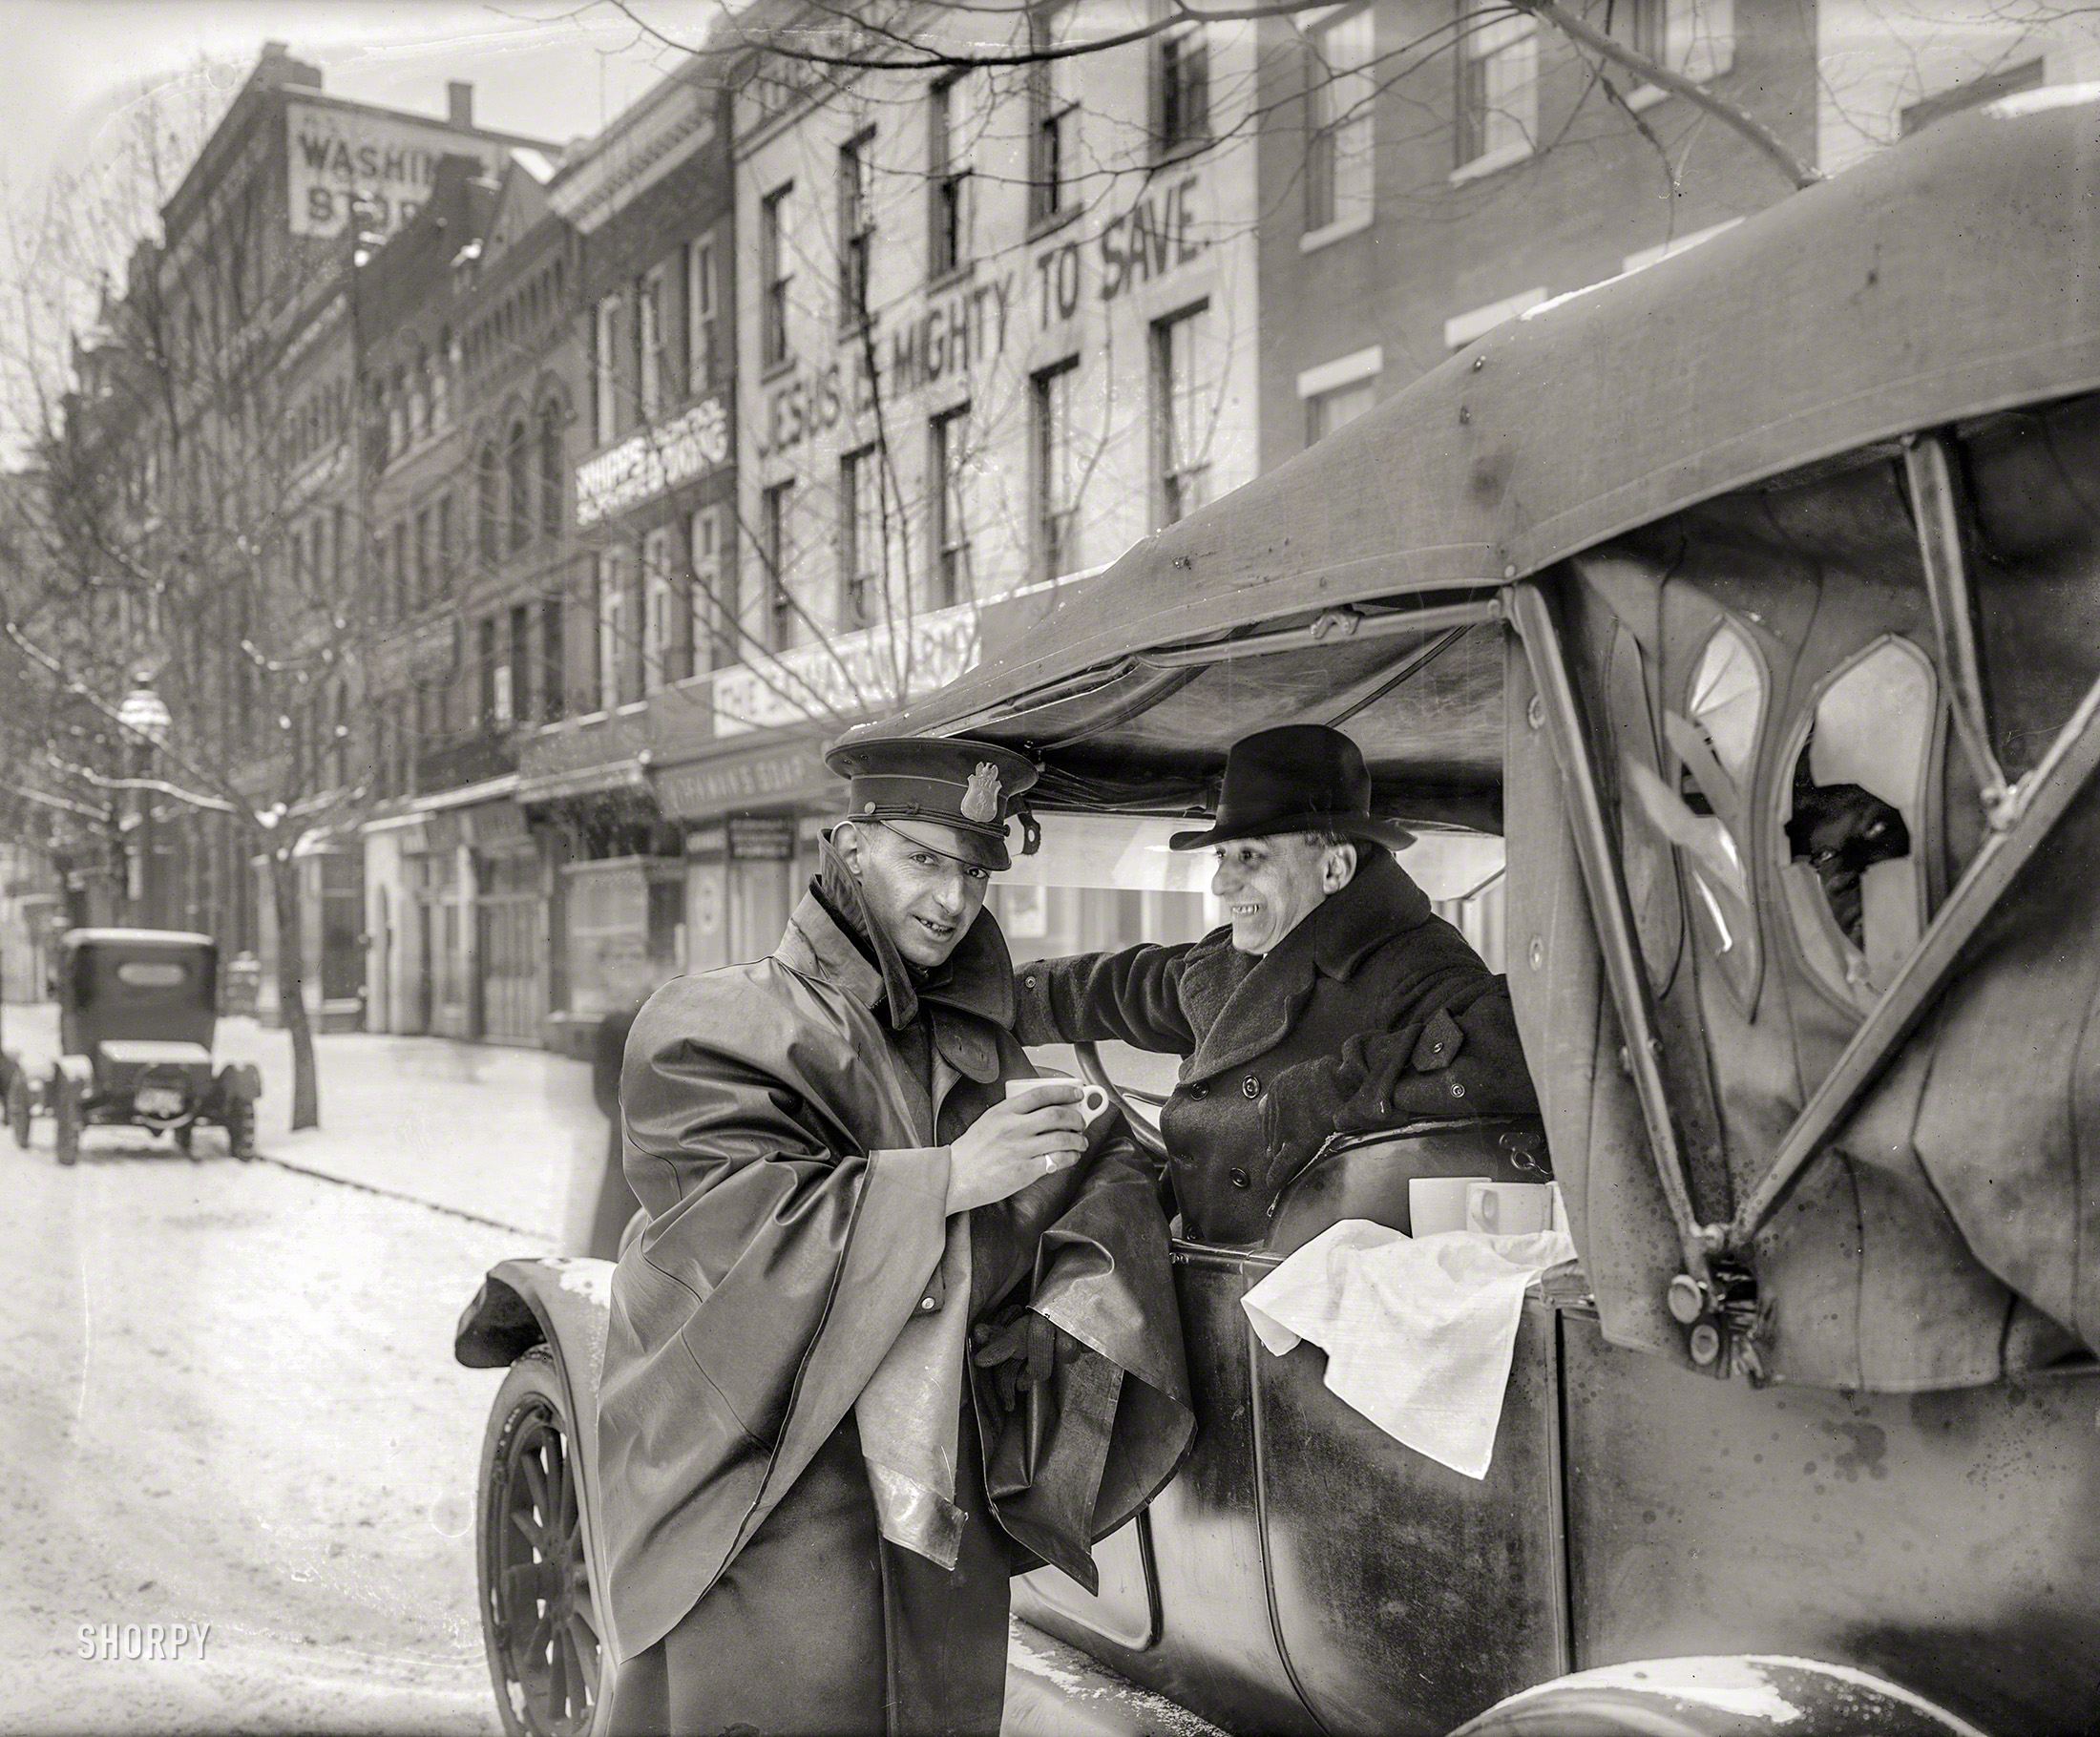 Washington, D.C, 1919. "Police coffee." Backed by the Salvation Army's powerful message of hope and/or thrift. 8x10 glass negative. View full size.